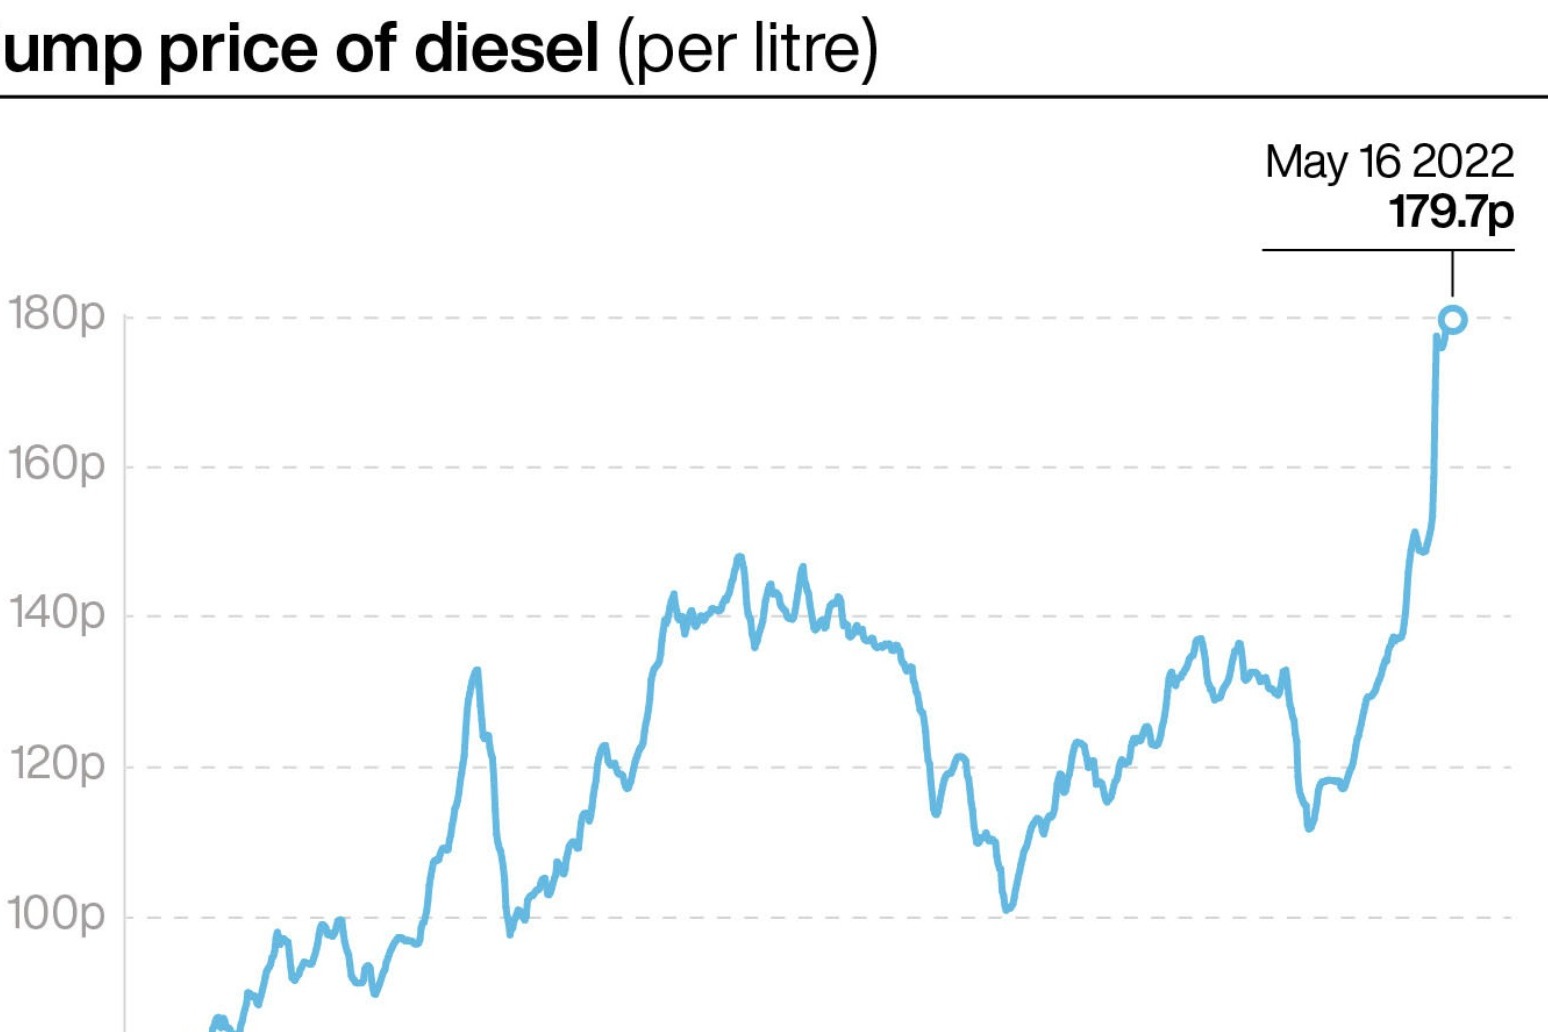 New record diesel price as retailers accused of hiking profits after duty cut 